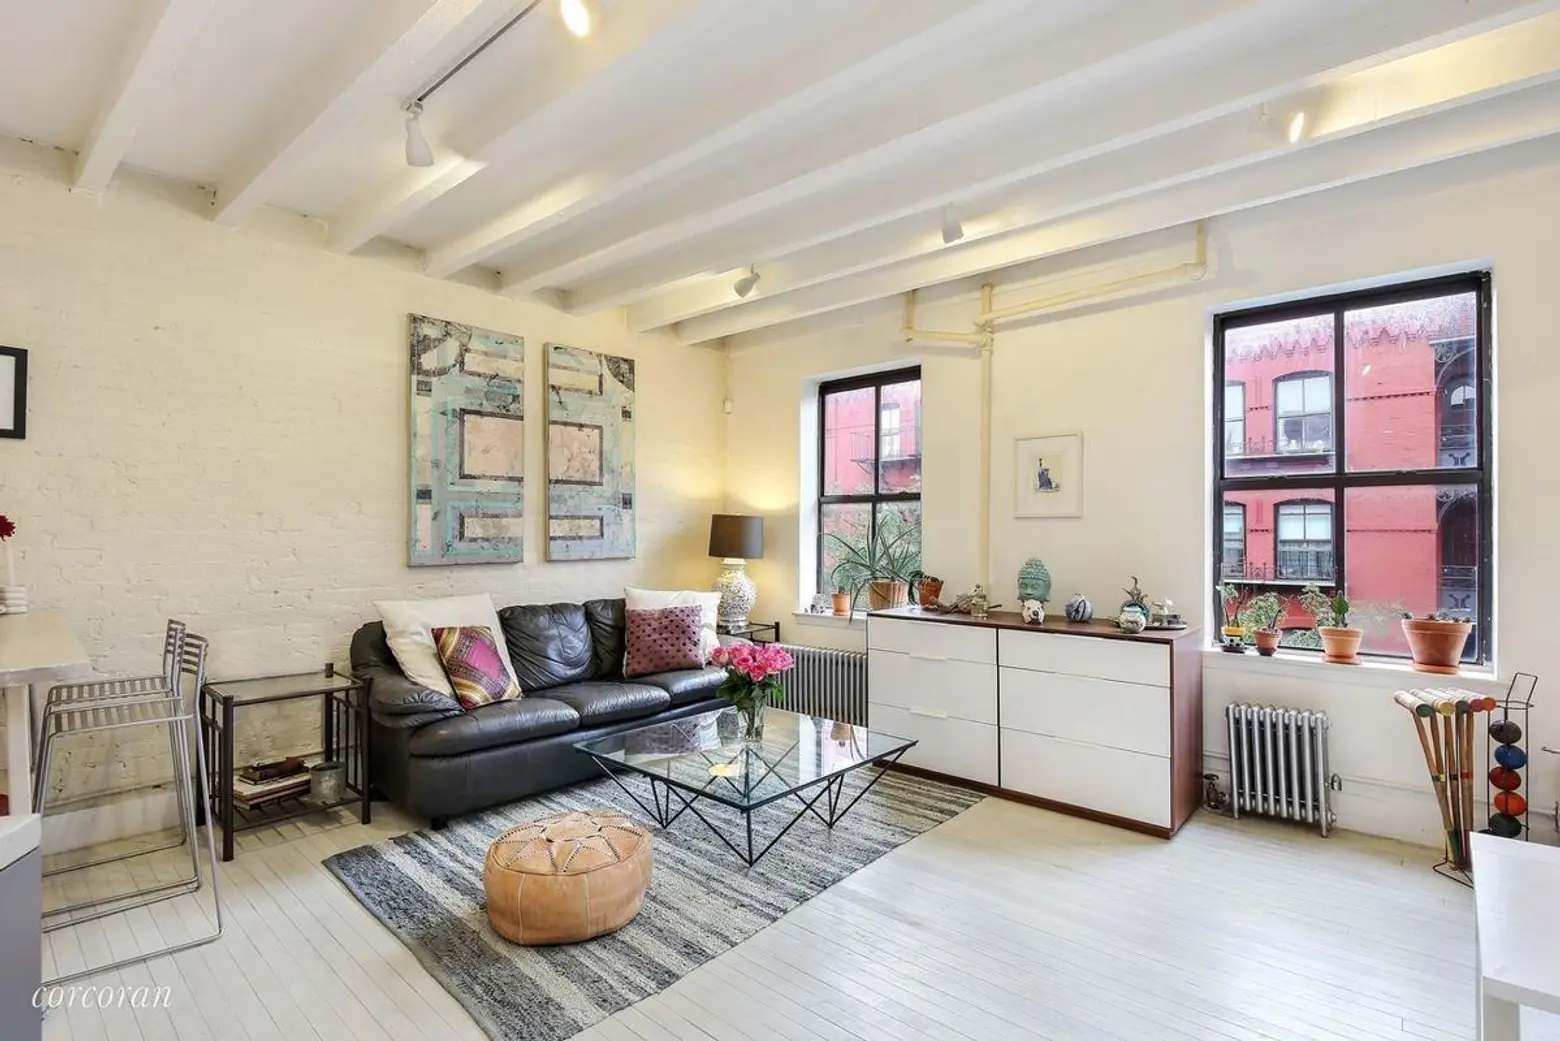 $675K for a custom renovated condo in a beloved, historic building of Cobble Hill